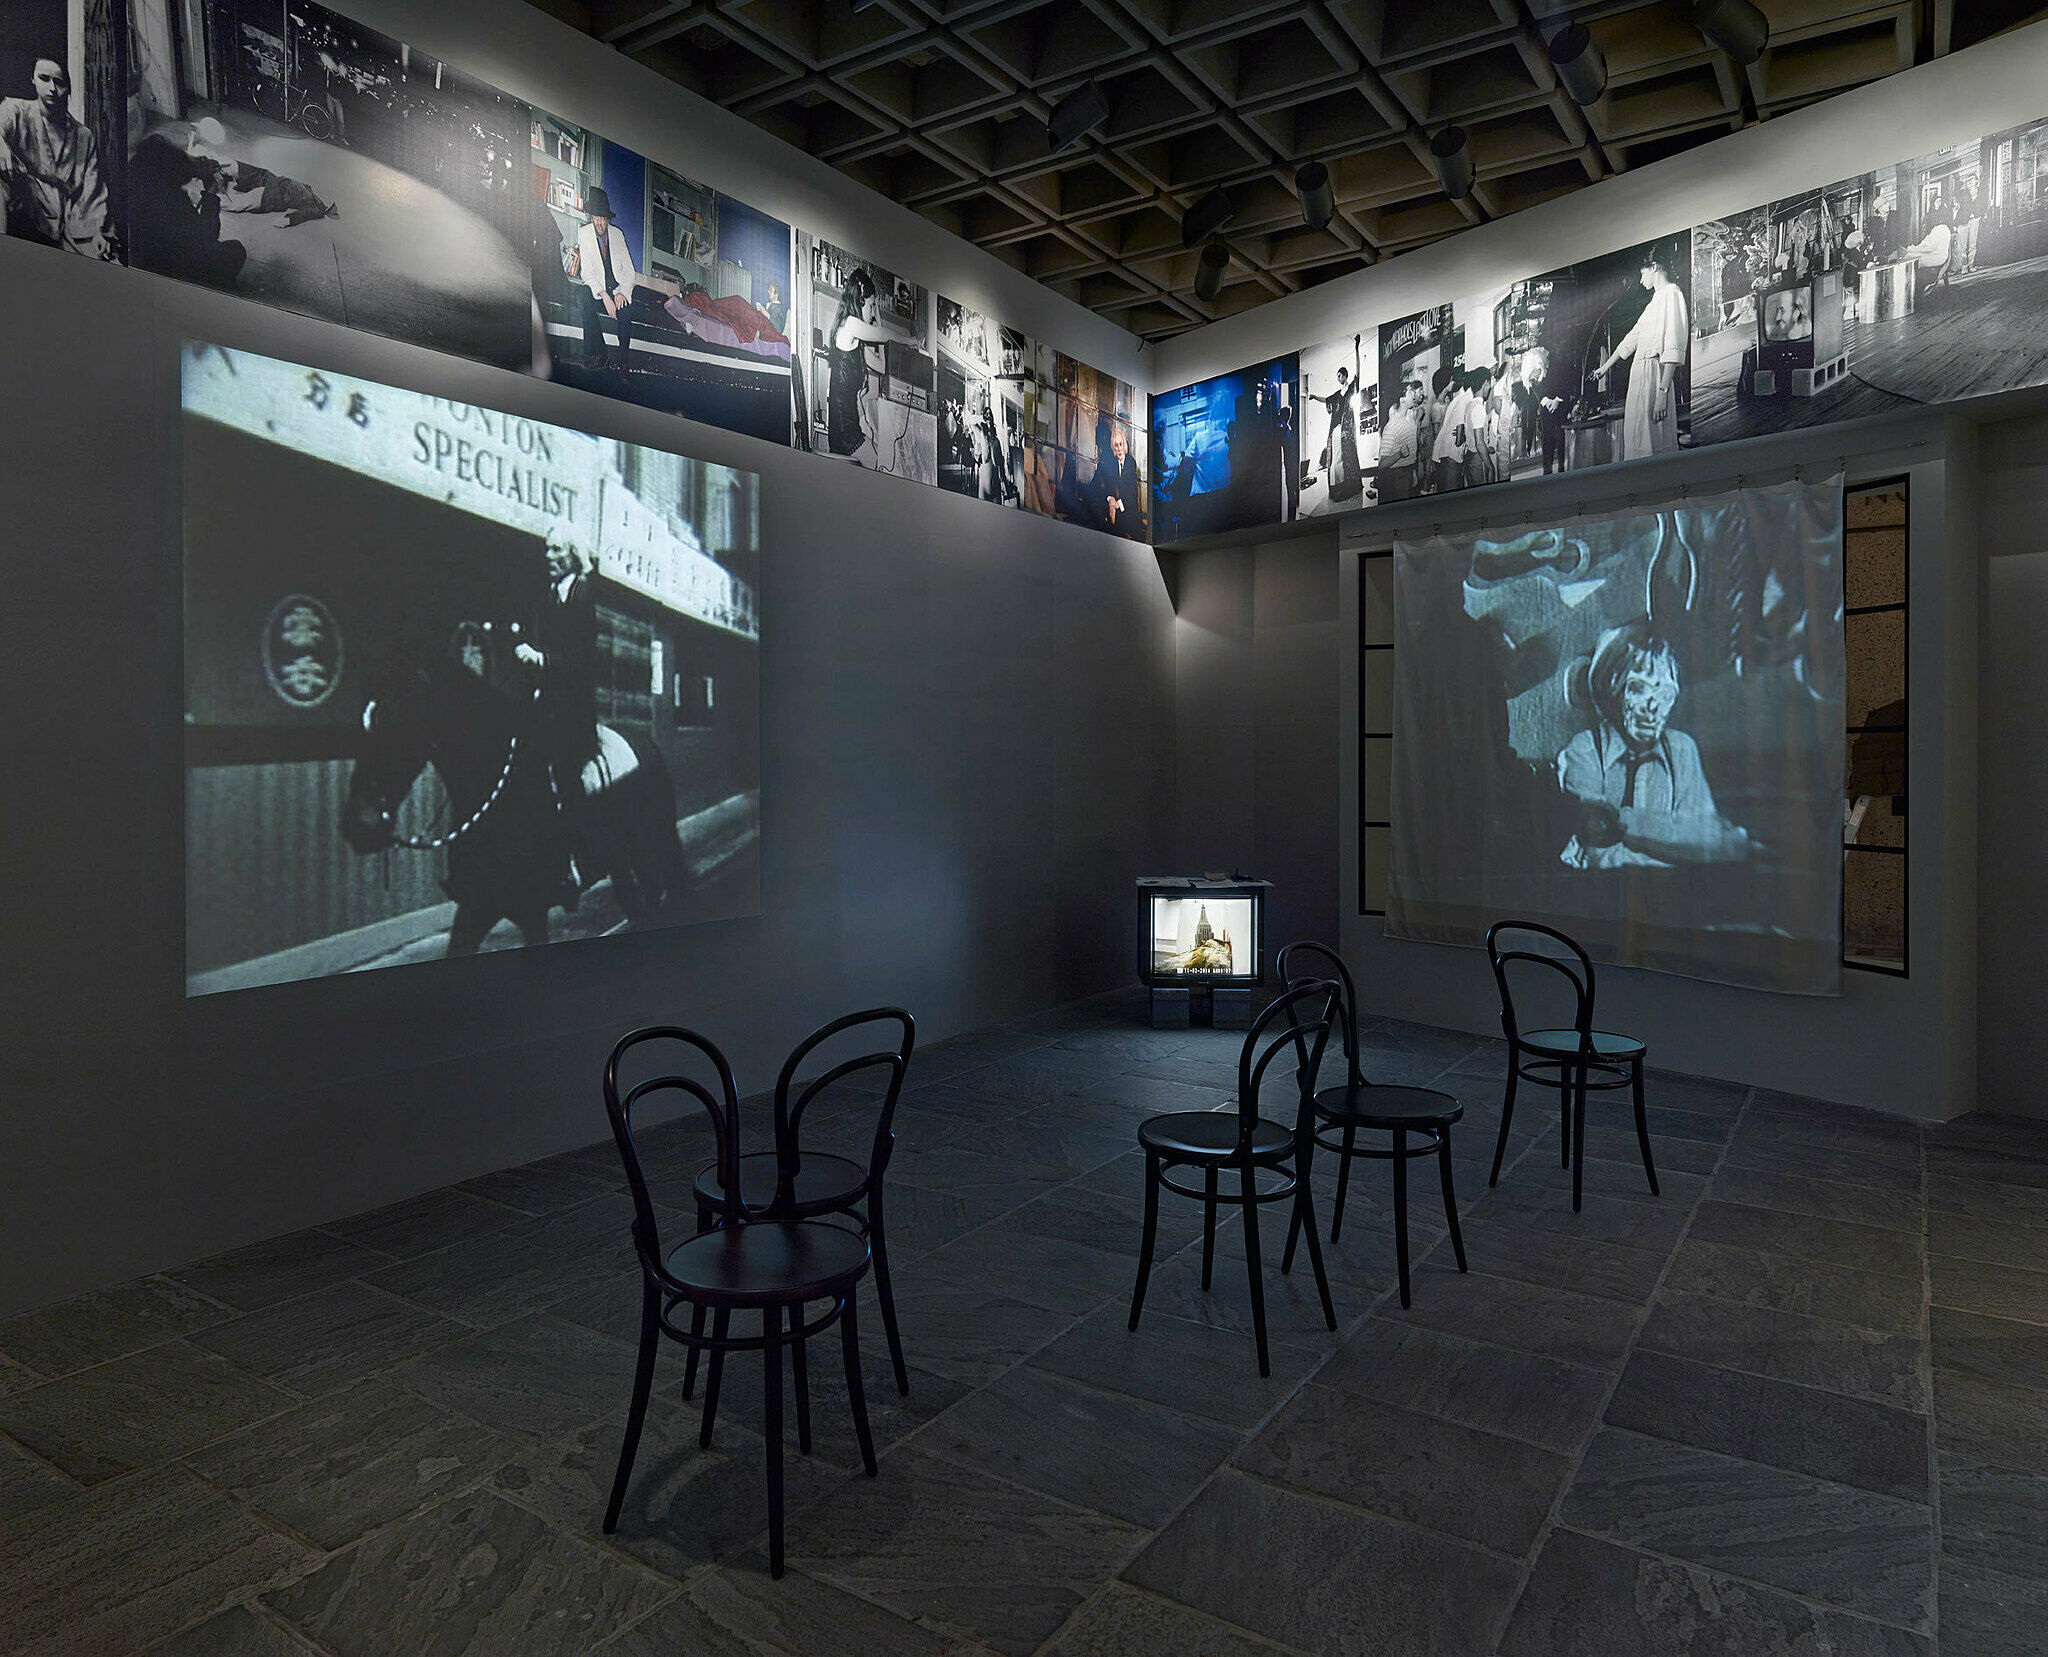 Art installation with chairs on the floor and television screens on two walls.